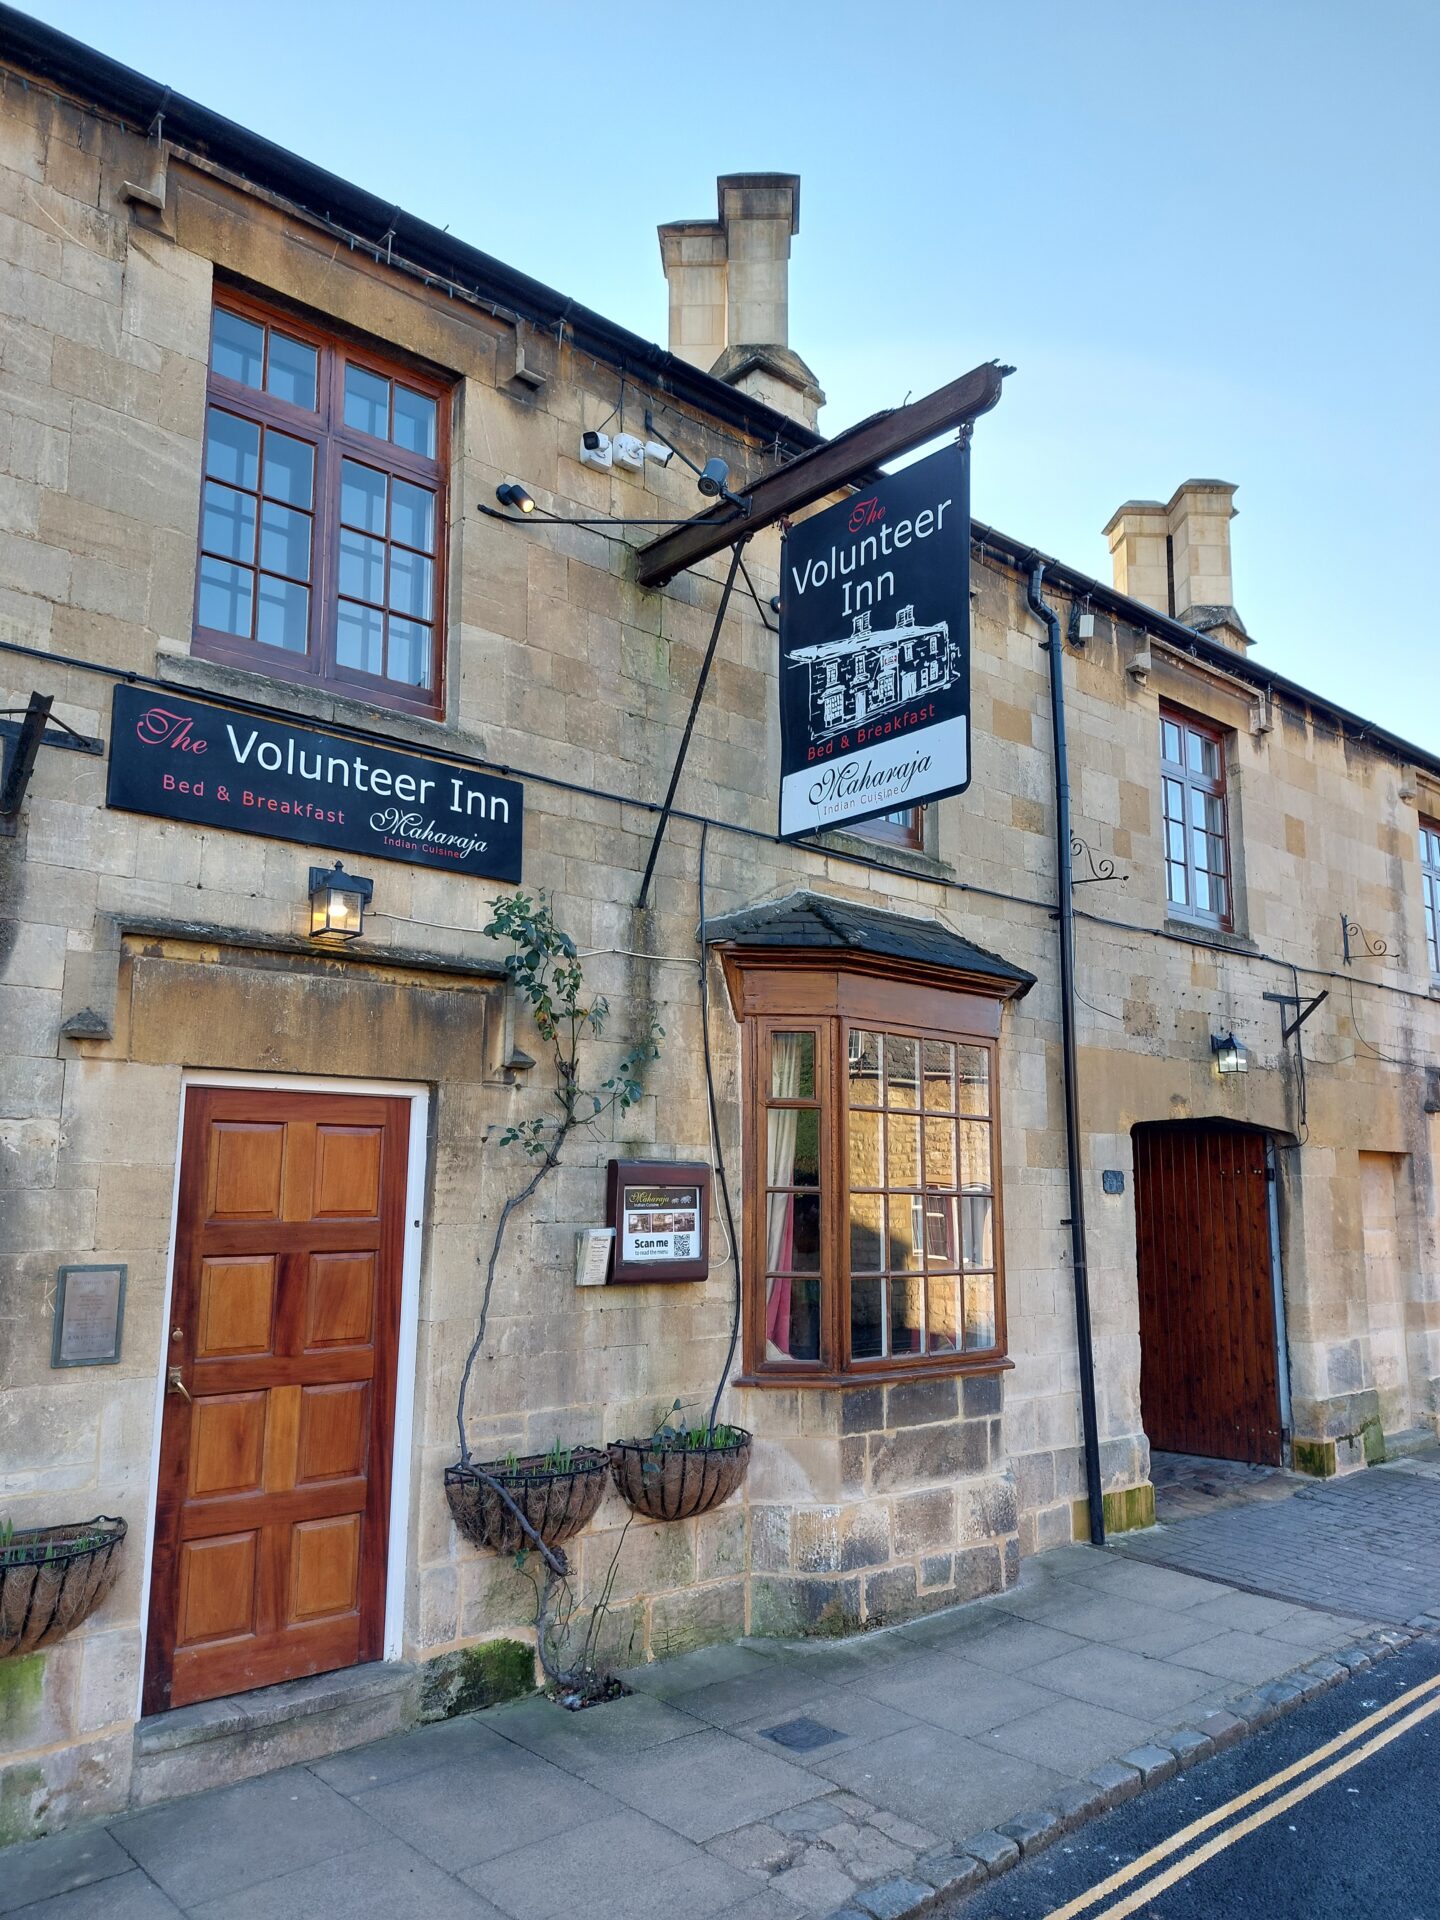 The Volunteer Inn, one of hte Best pubs in Chipping Campden